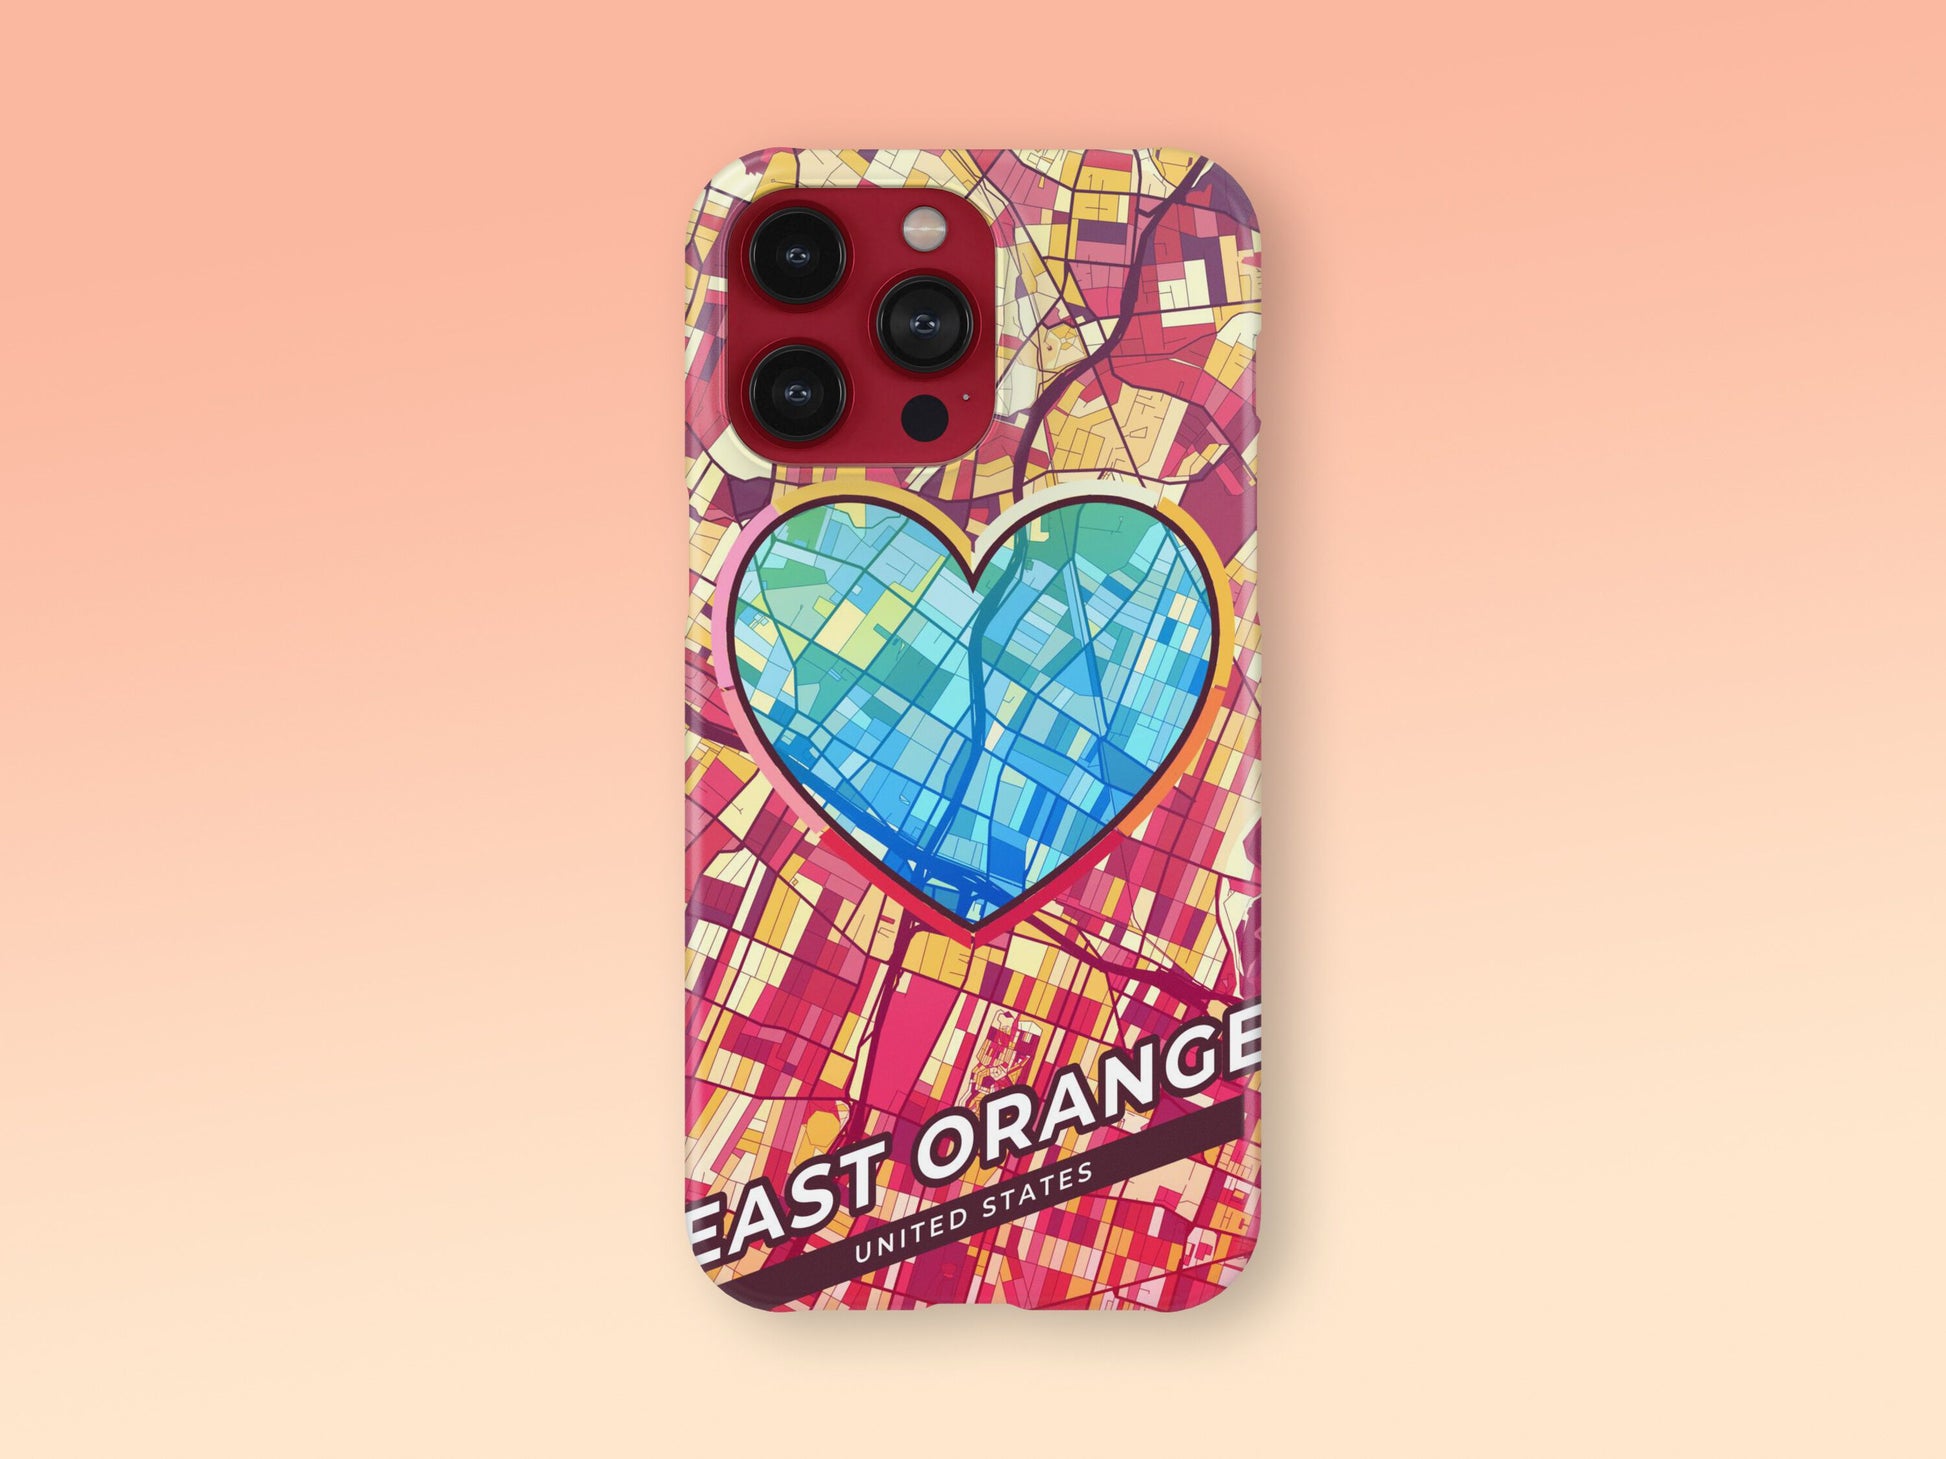 East Orange New Jersey slim phone case with colorful icon. Birthday, wedding or housewarming gift. Couple match cases. 2